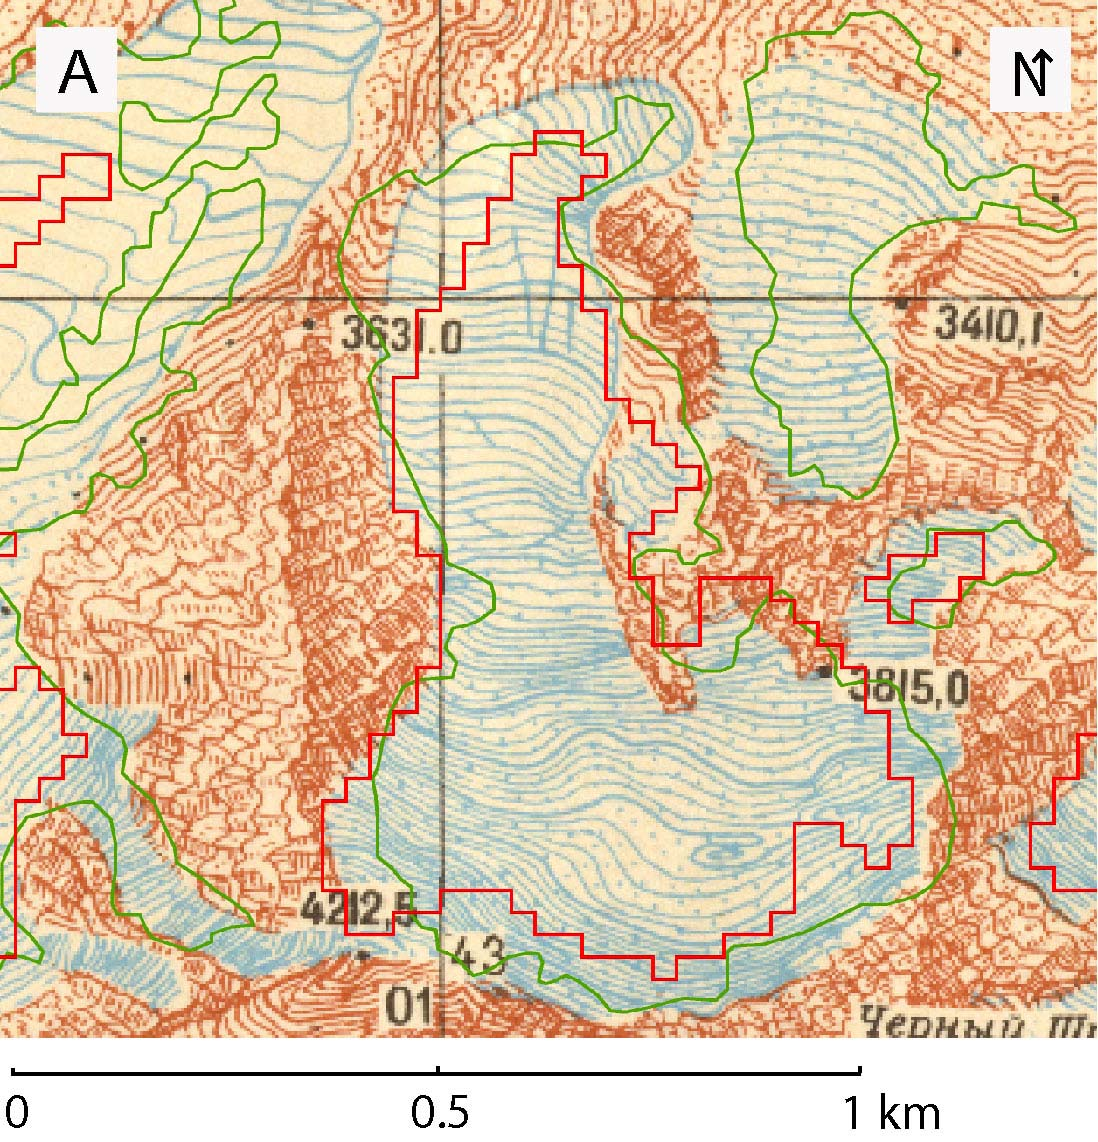 Glacier melting 1963-2000 Illustration of glacier contour lines showing the retreat of frontlines and the